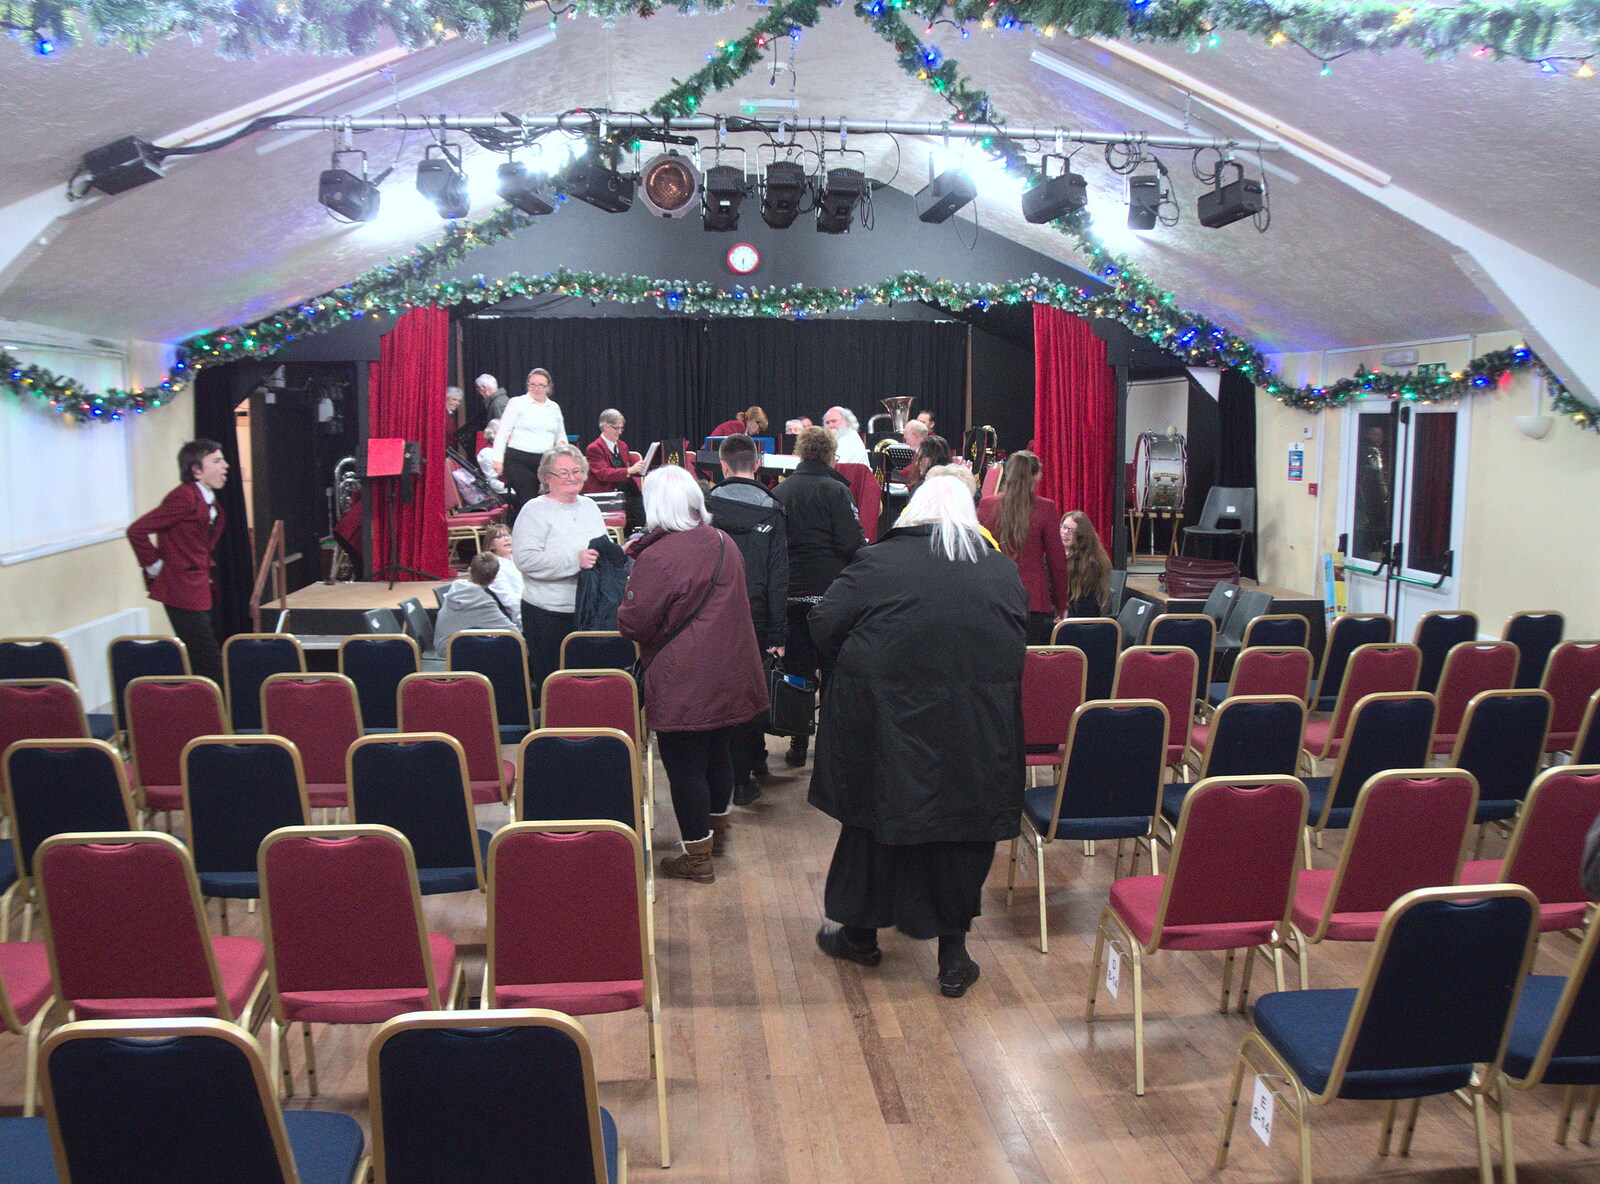 The band sets up early from The Gislingham Silver Band Christmas Concert, Gislingham, Suffolk - 11th December 2018